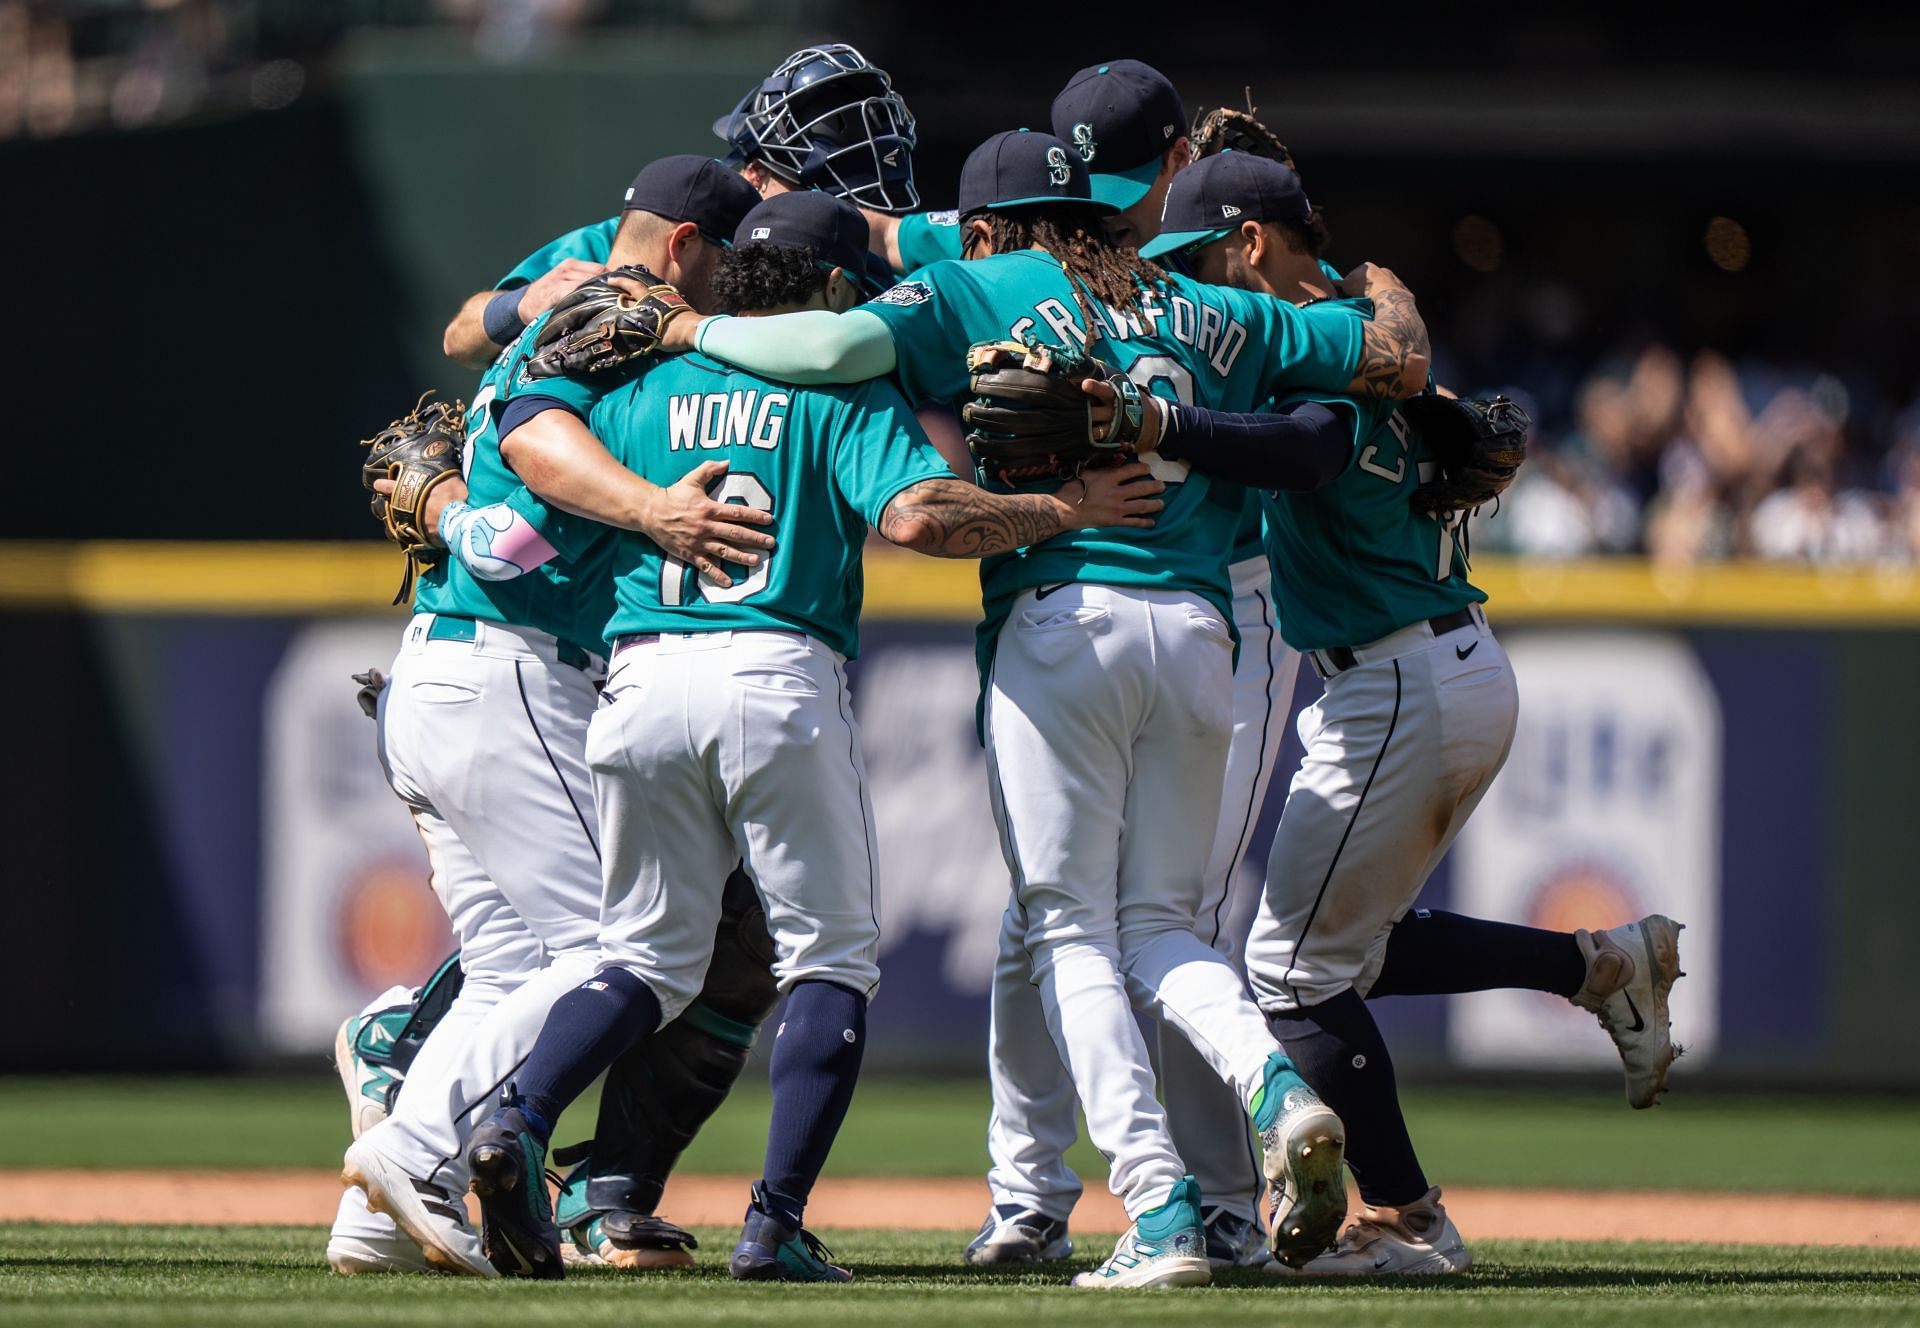 The Seattle Mariners have struggled